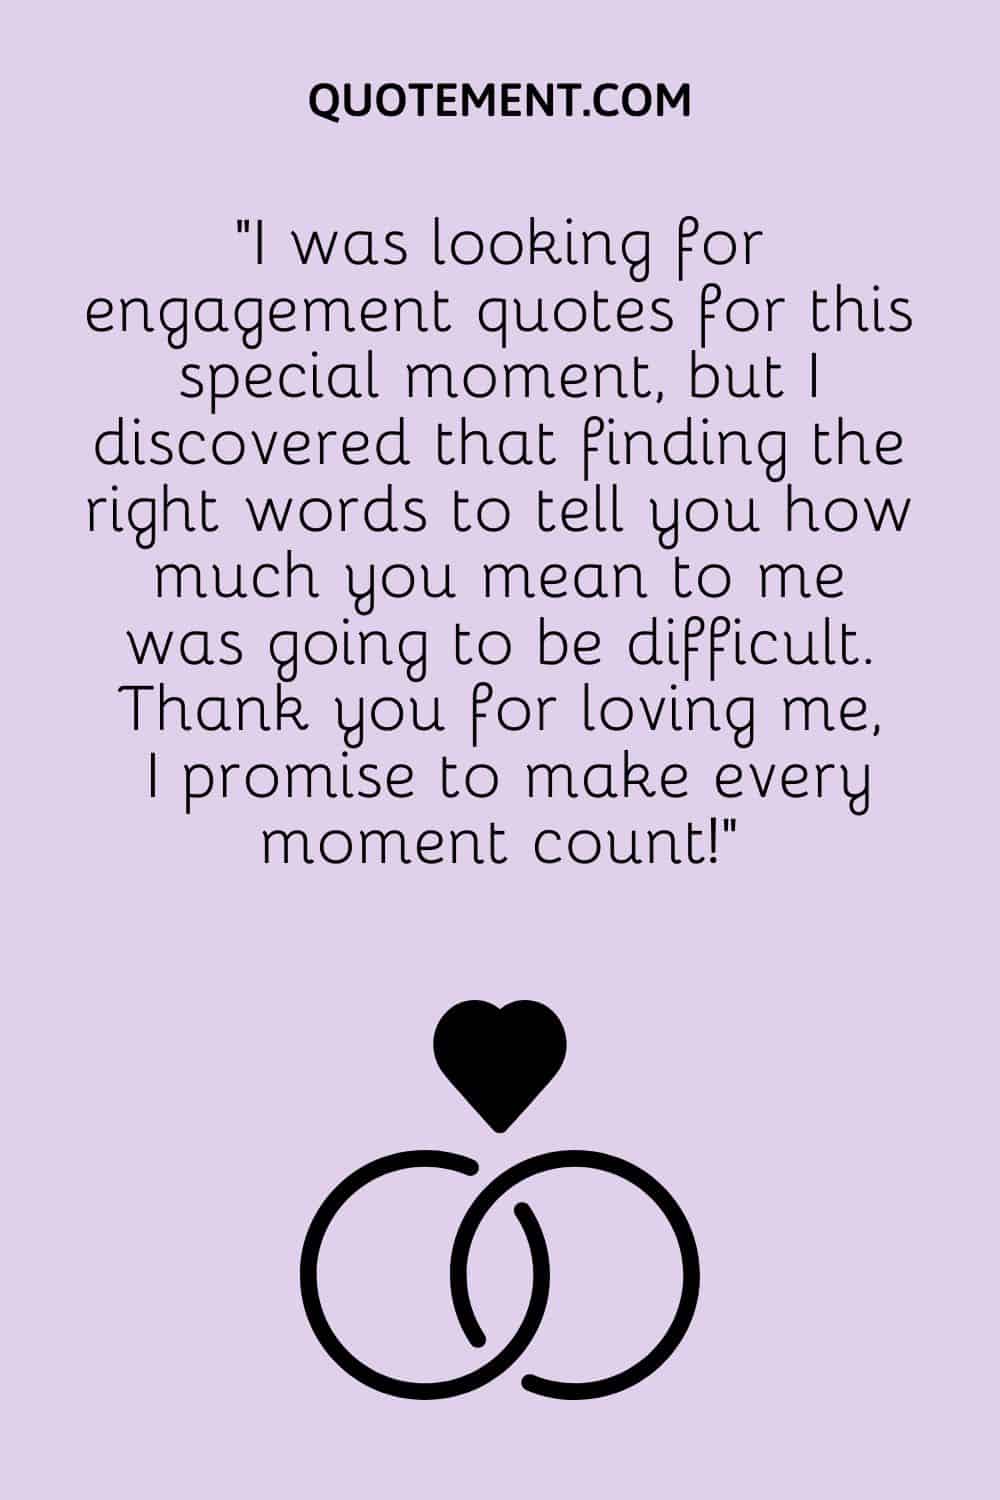 I was looking for engagement quotes for this special moment